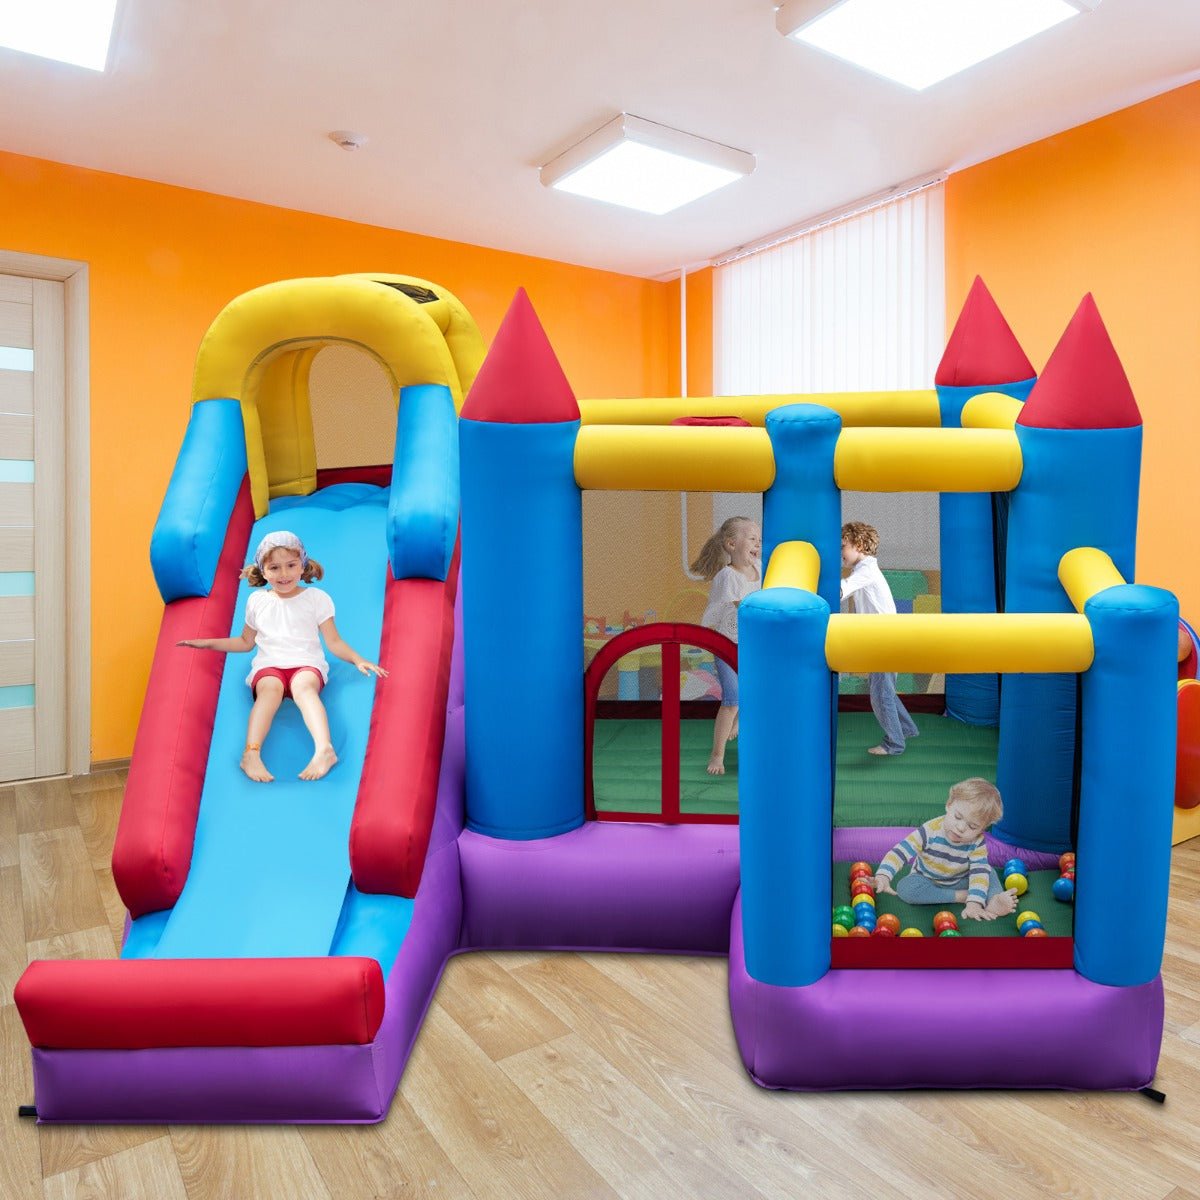 Inflatable Play Zone - Slide, Trampoline & Multi-Activity Bounce House (No Blower)